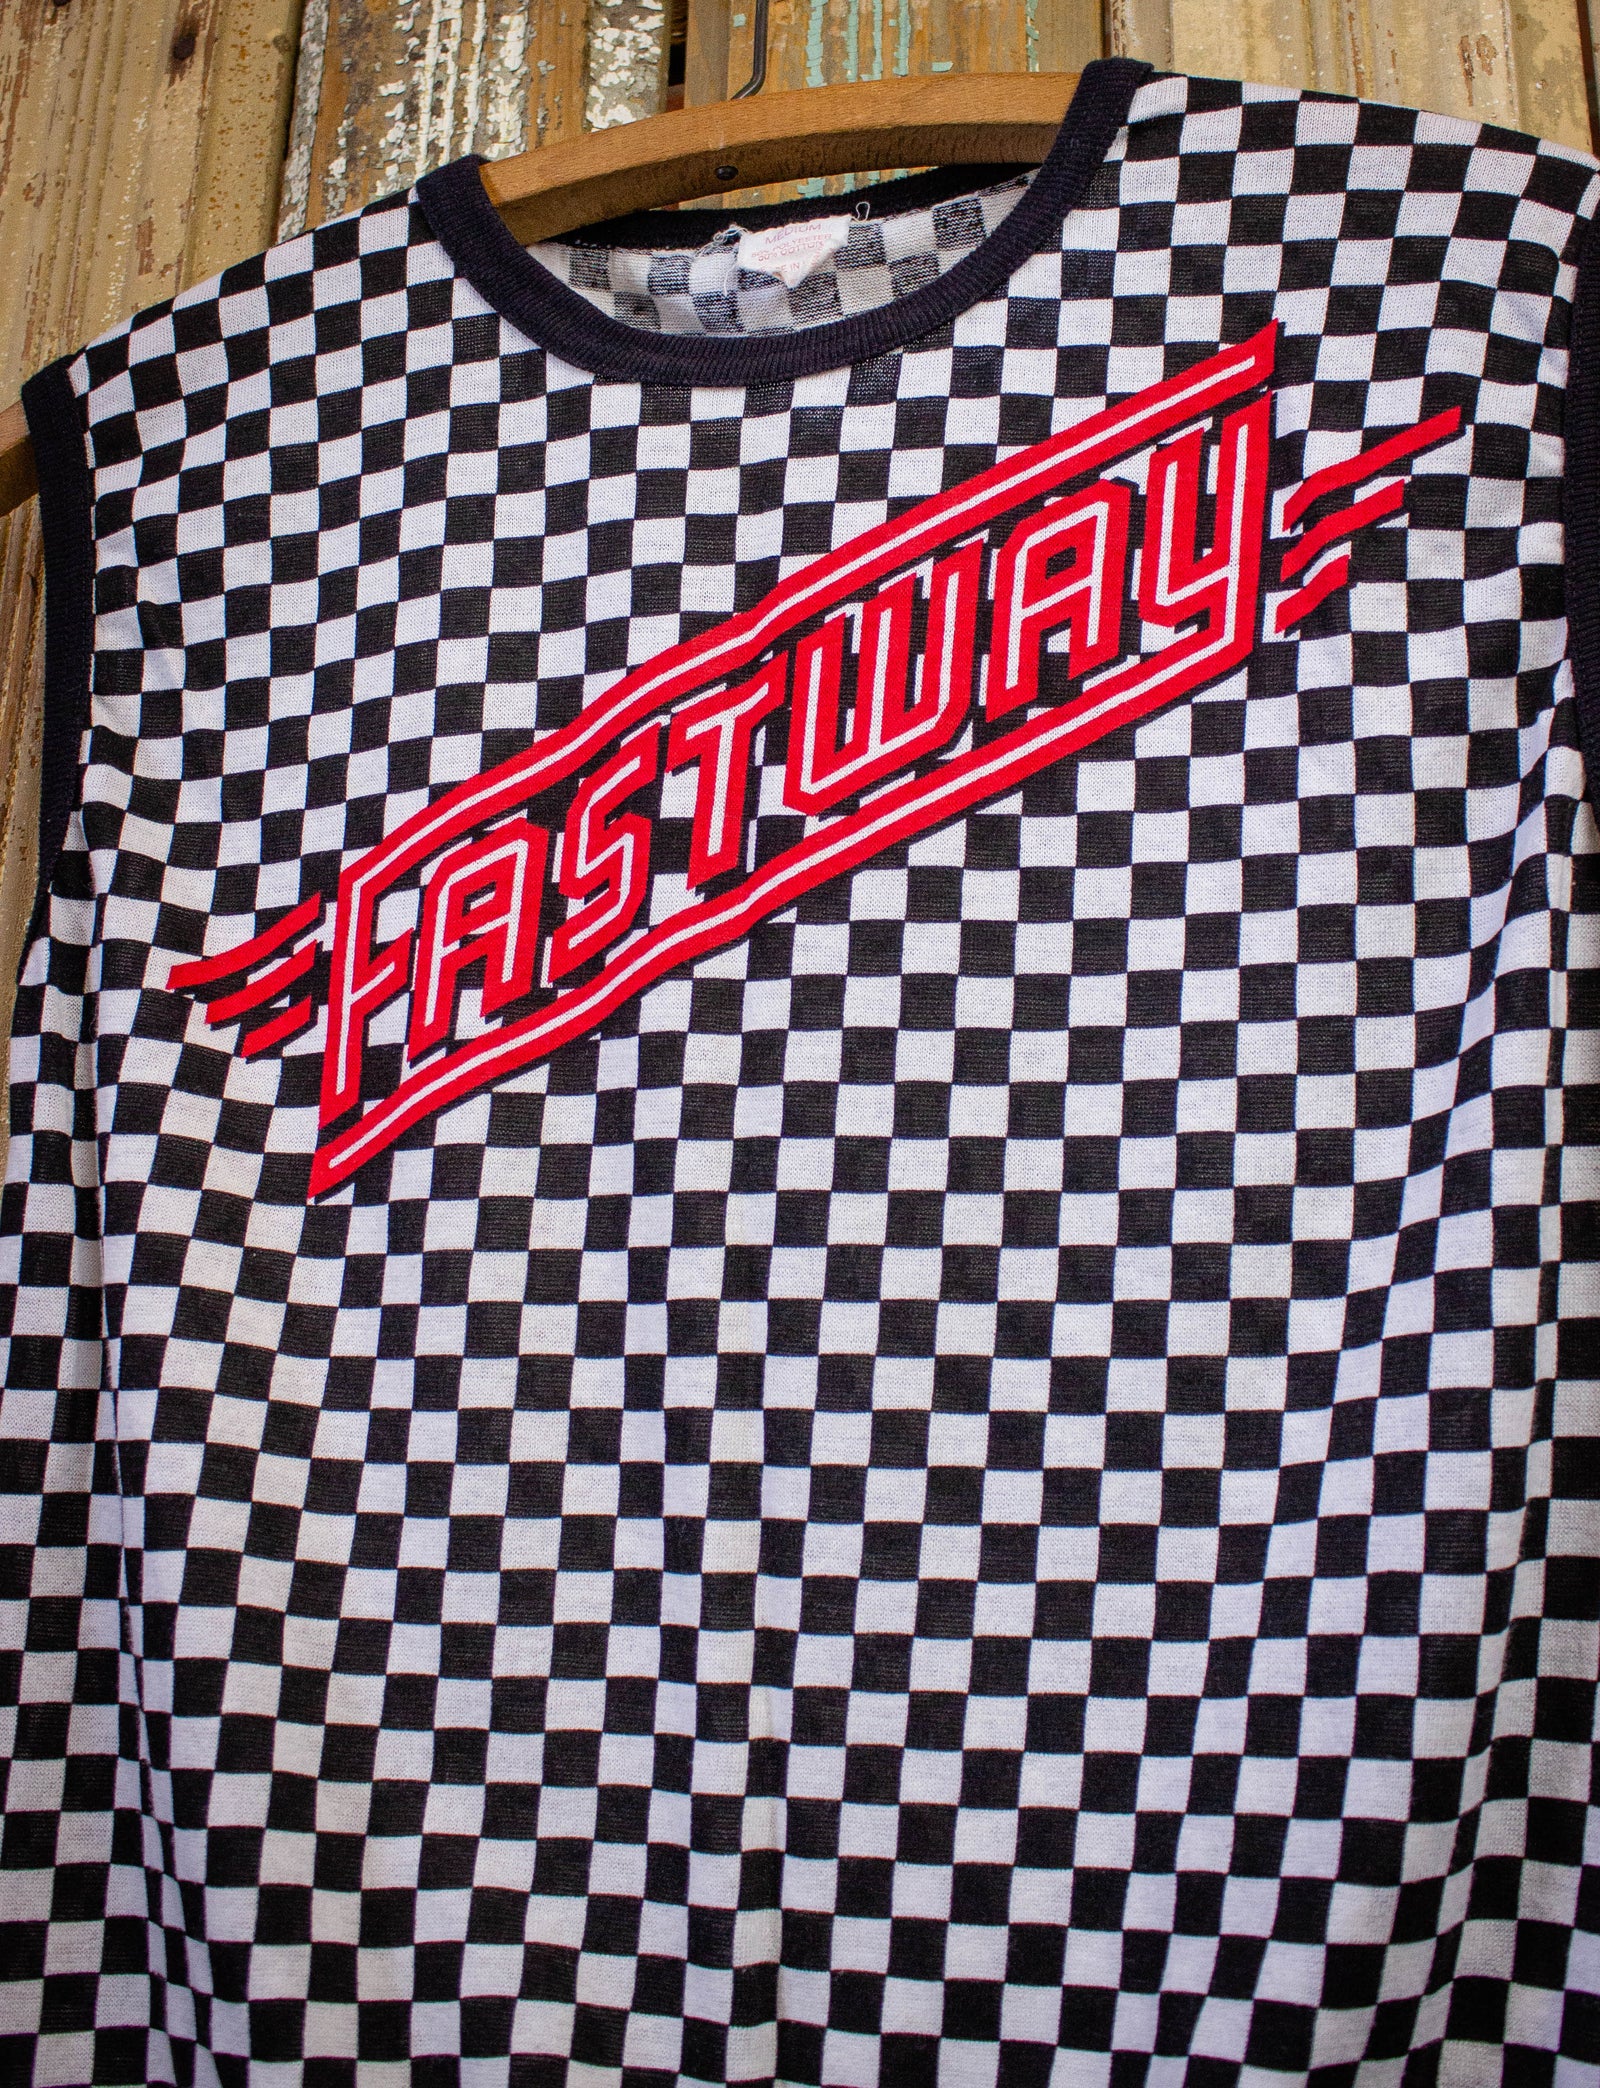 Vintage Fastway Checkered Flag Concert Muscle T Shirt 1983 Small